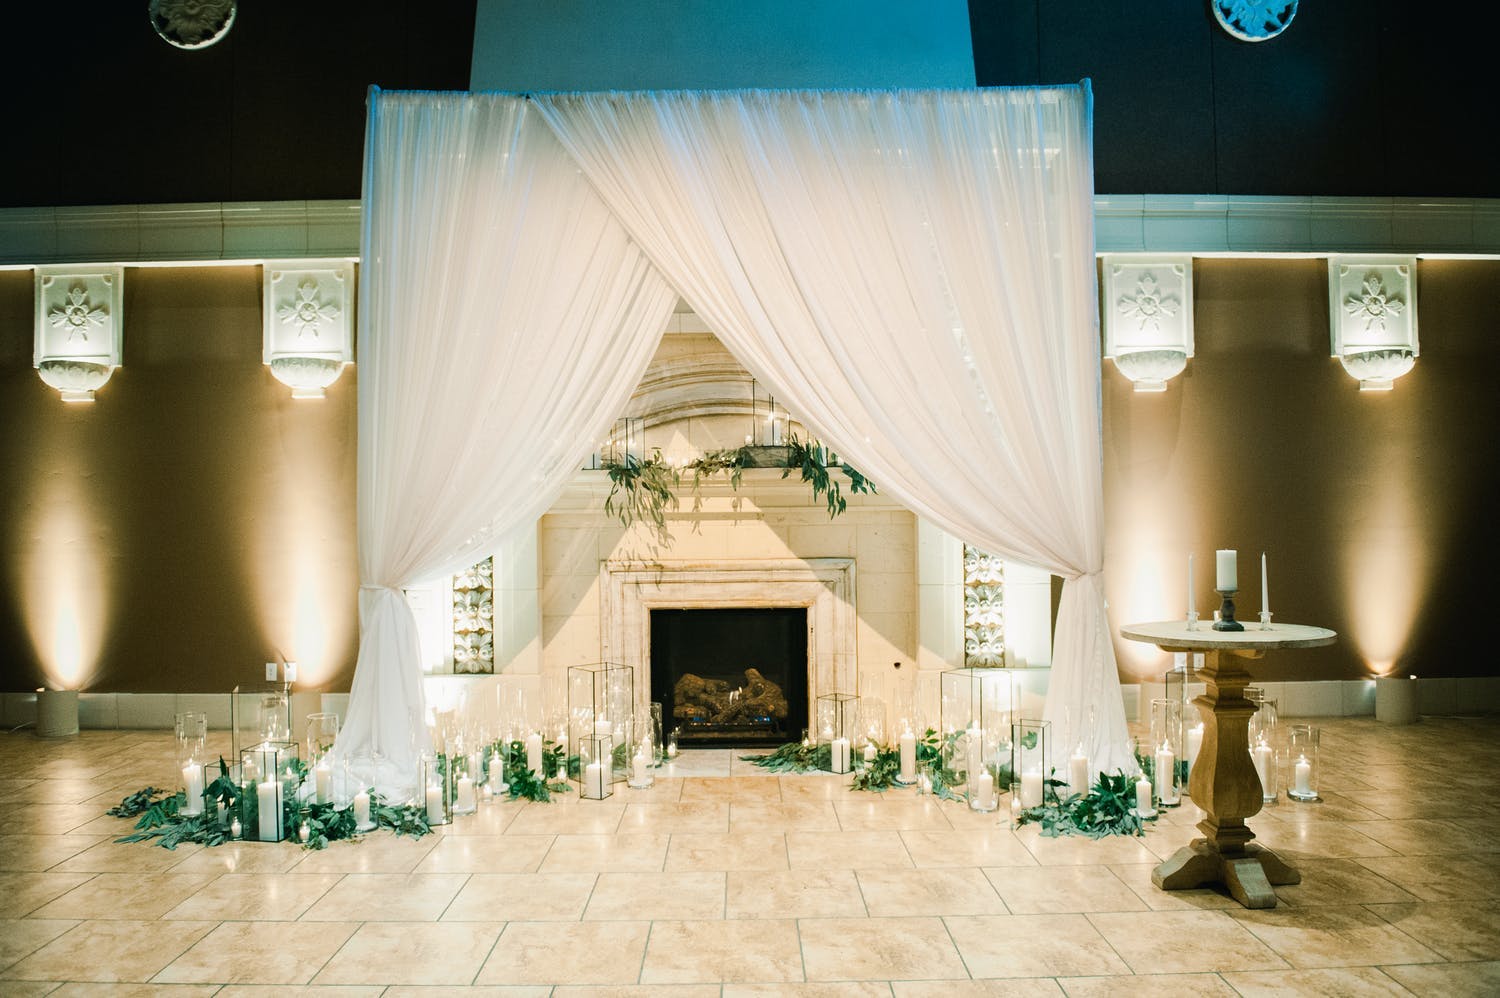 Fireplace ceremonial backdrop with white drapery, candlelight, and greenery | PartySlate